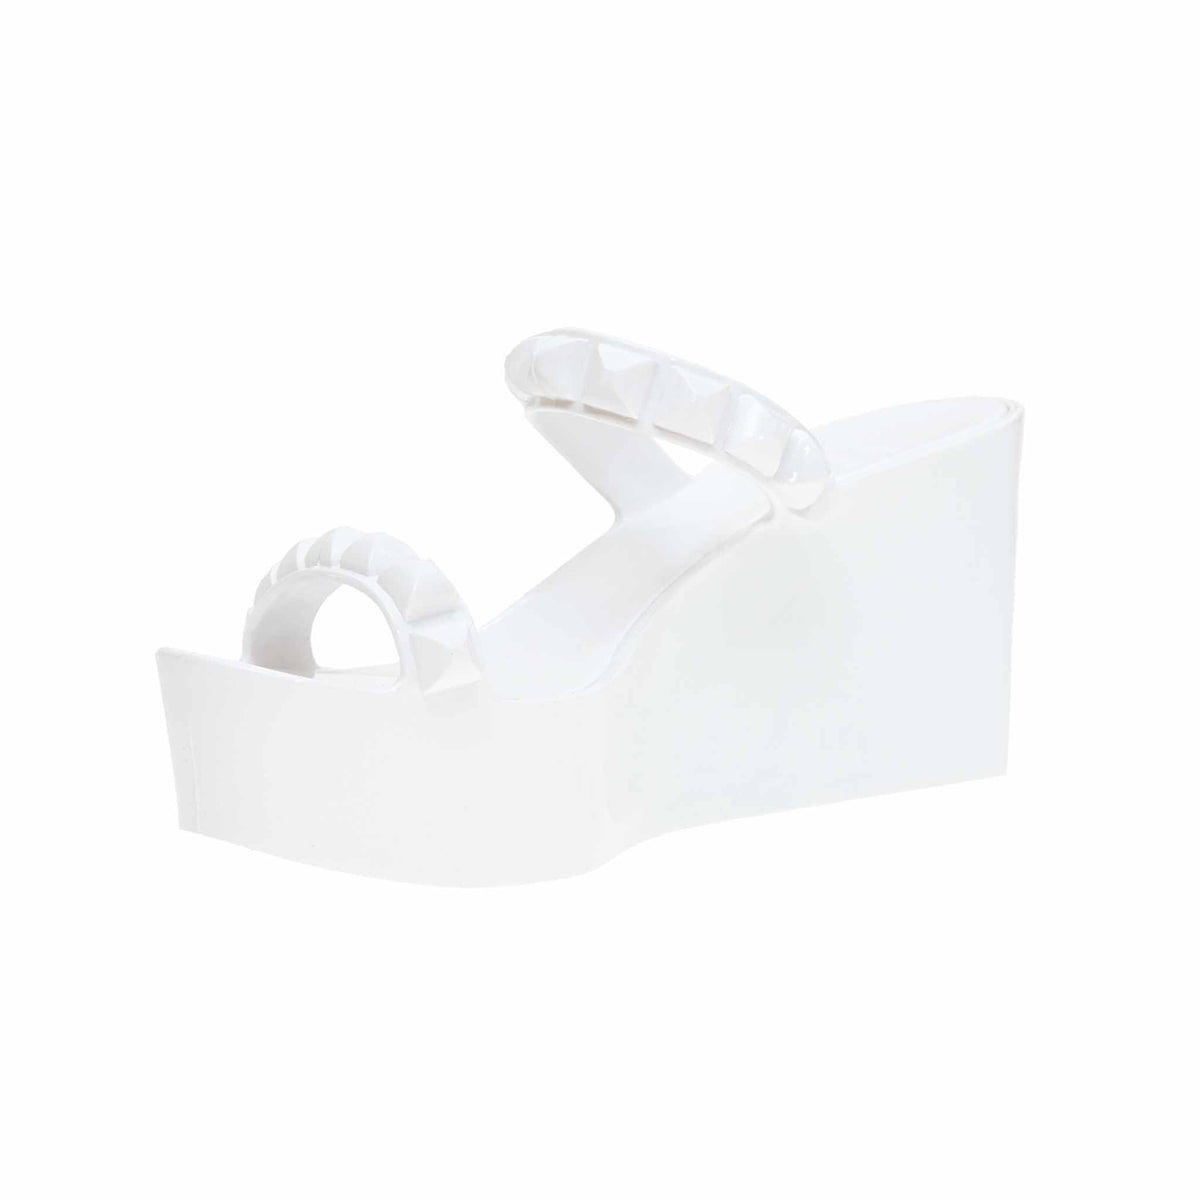 Carmen Sol Tonino white heels that reflect your personal style